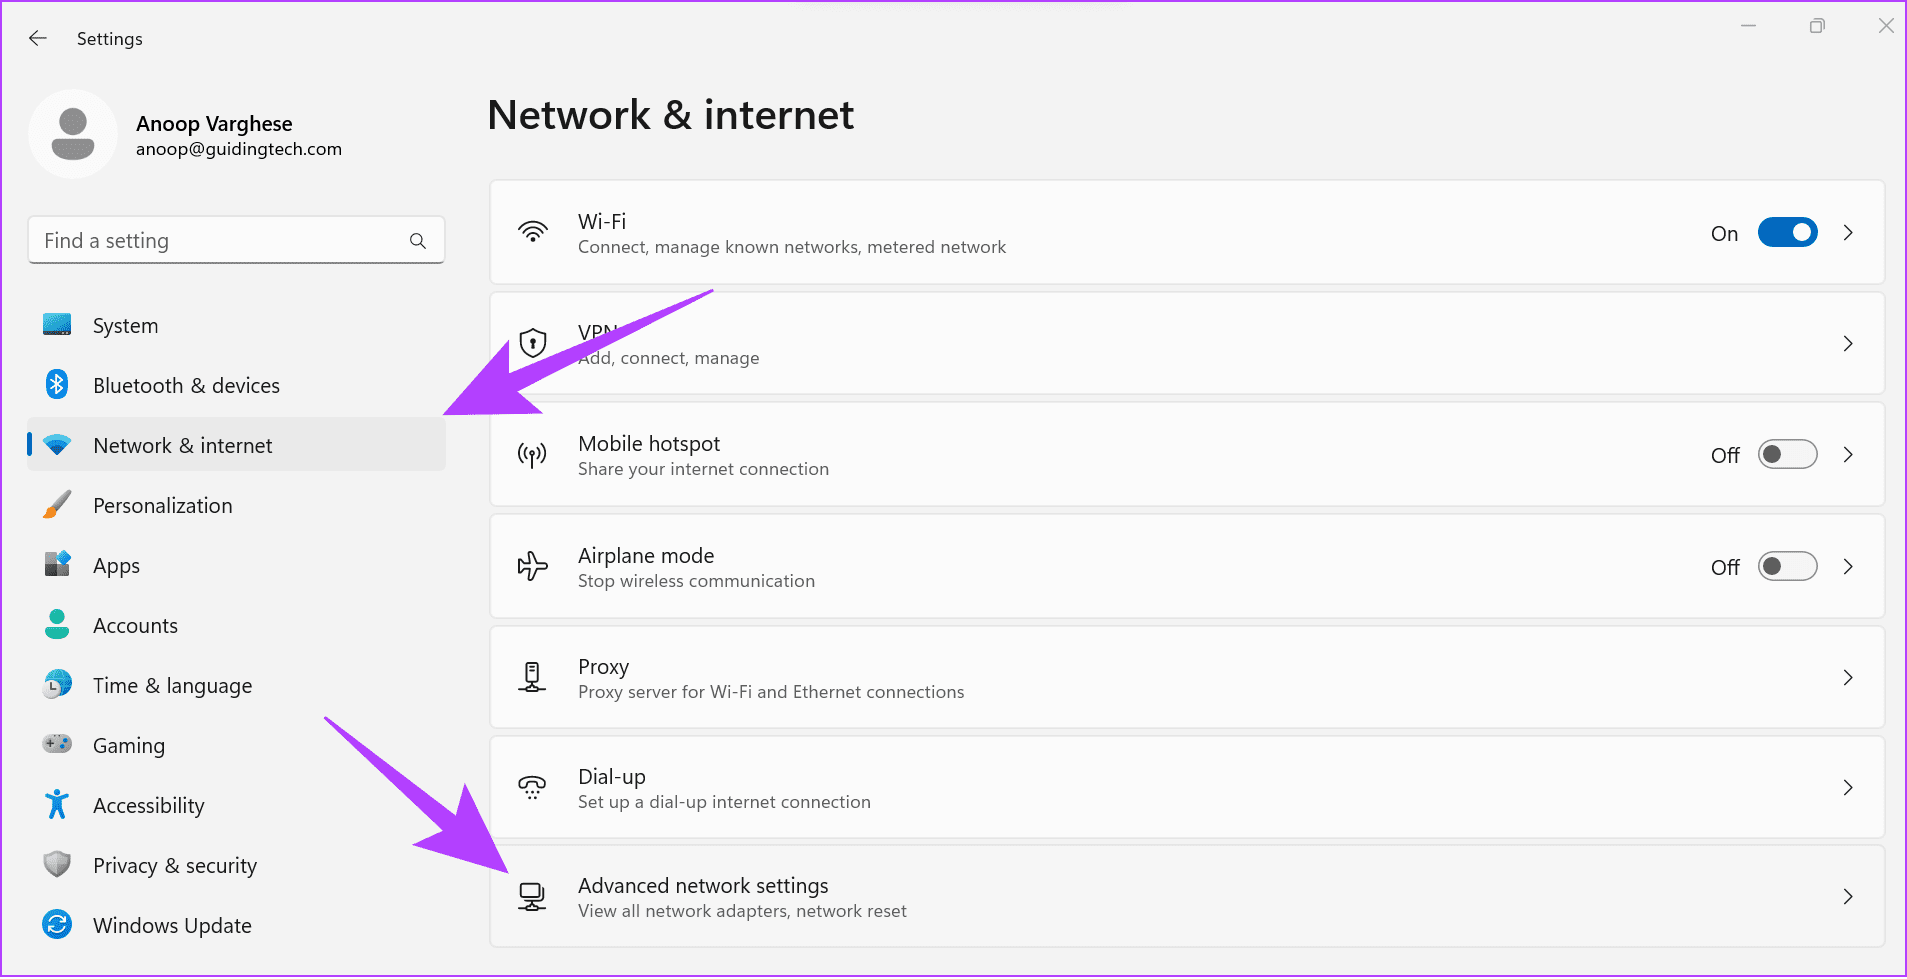 choose network and internet and then choose advbacned network settings